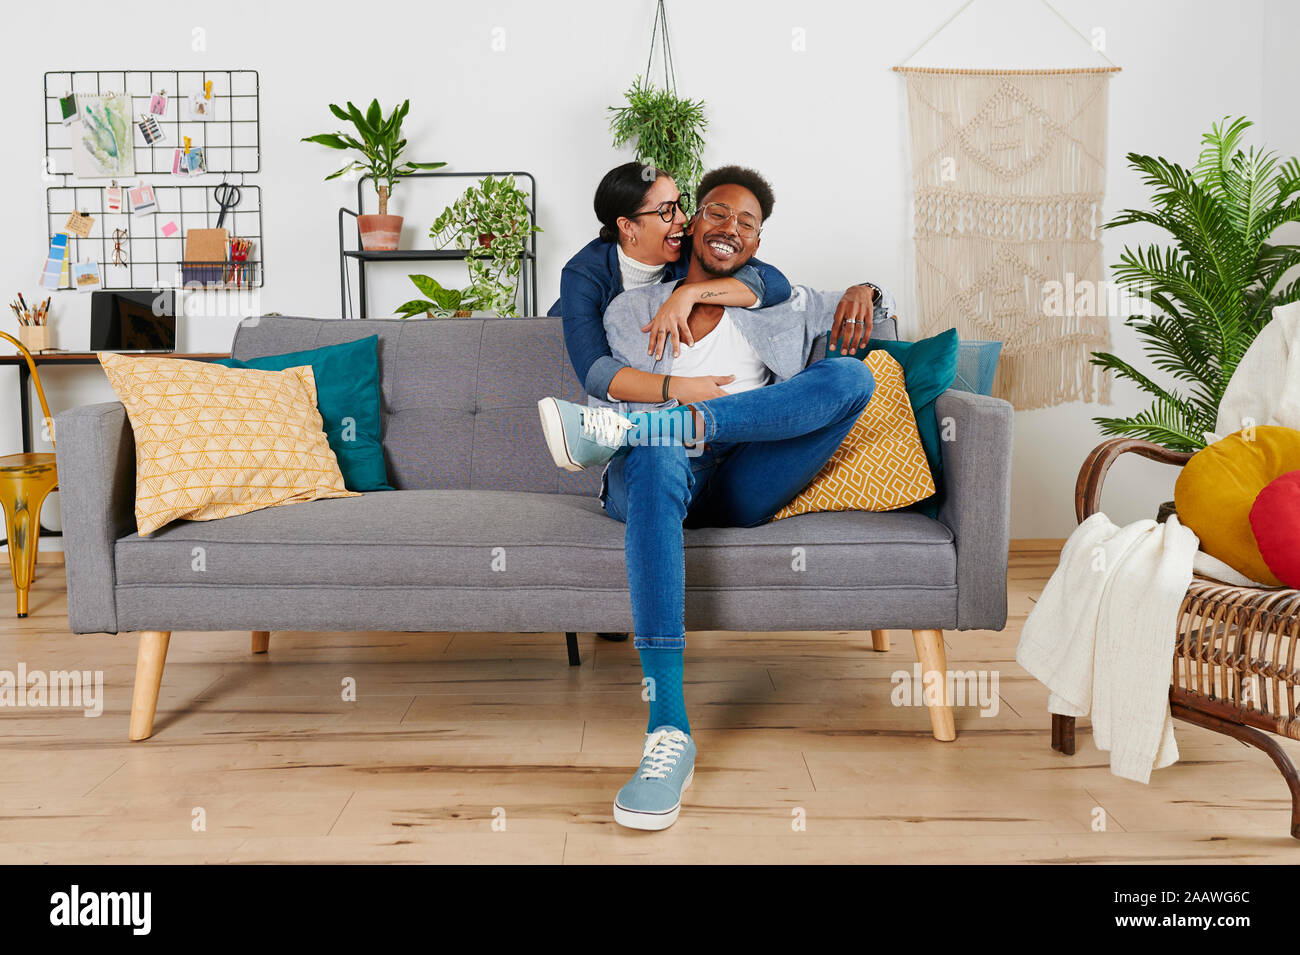 Multiethnic couple spending time together at living room Stock Photo